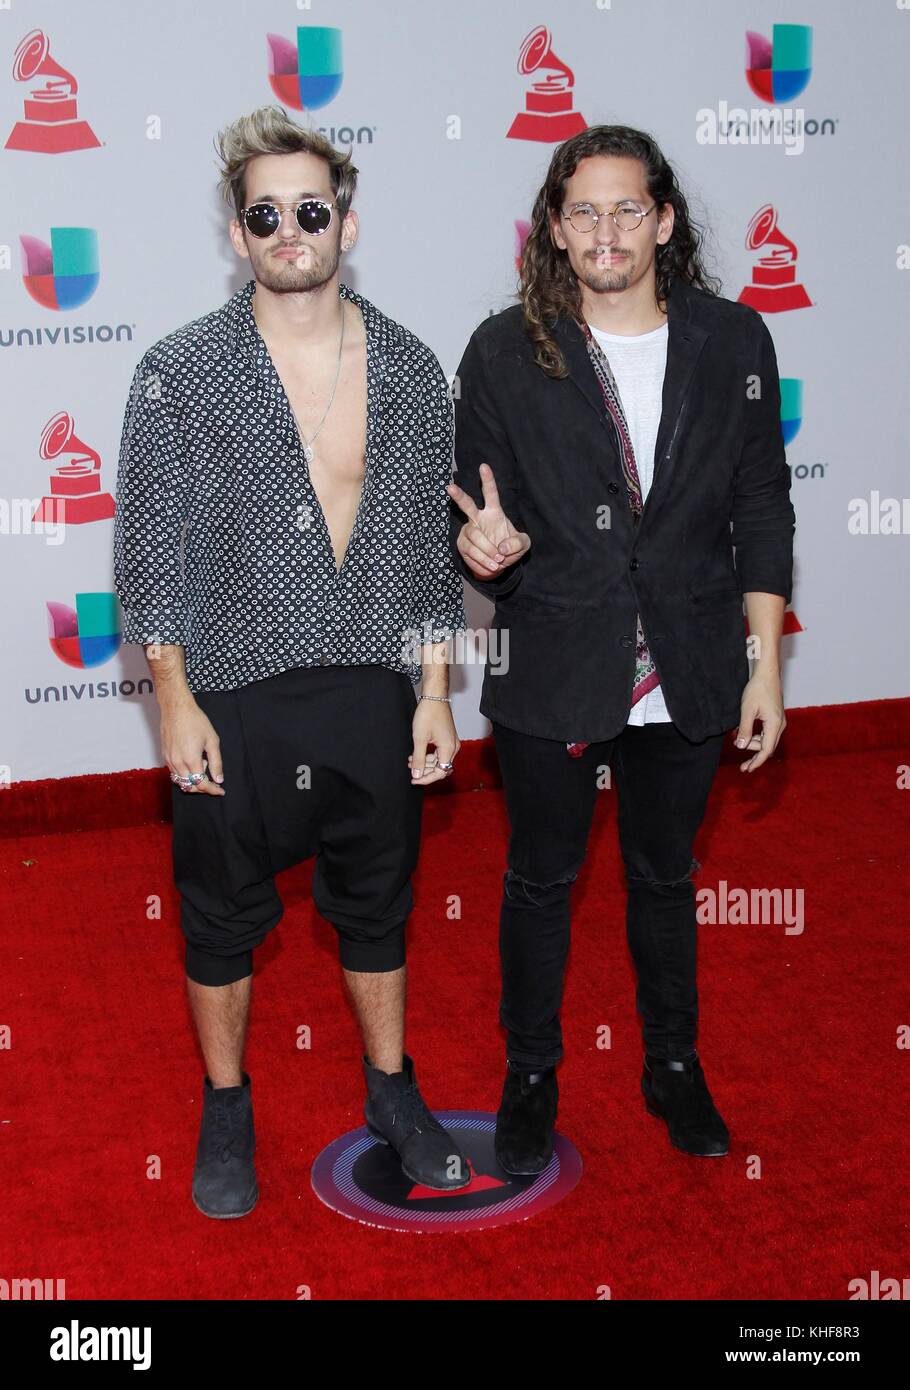 Las Vegas, NV, USA. 16th Nov, 2017. Mau y Ricky at arrivals for 18th Annual Latin Grammy Awards Show - Arrivals 3, MGM Grand Garden Arena, Las Vegas, NV November 16, 2017. Credit: JA/Everett Collection/Alamy Live News Stock Photo